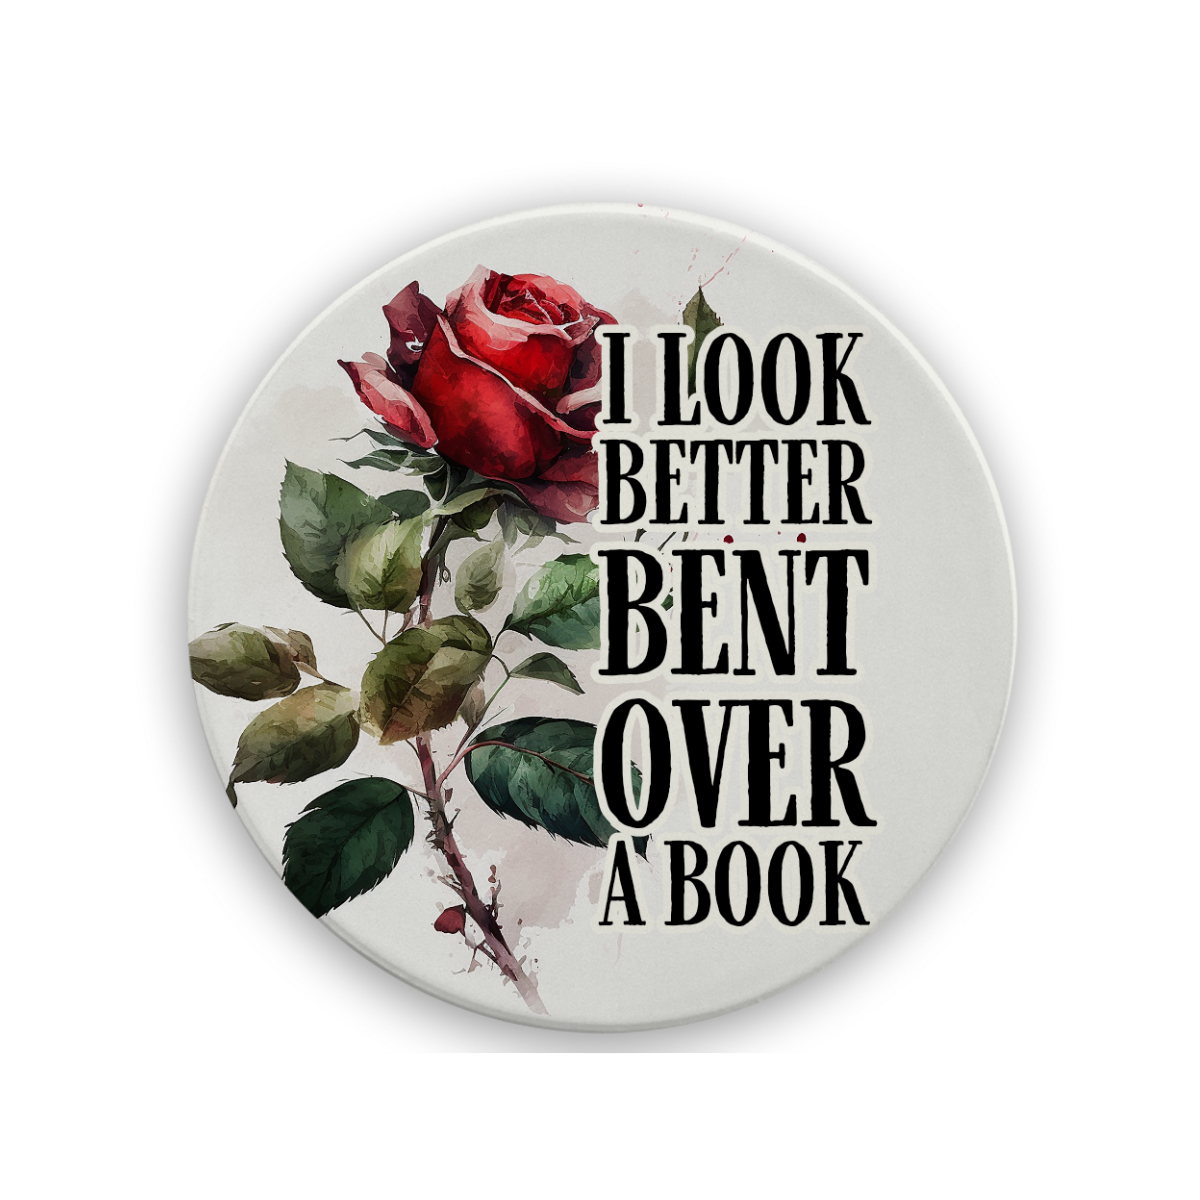 I Look Better Bent Over A Book | Drink Coaster - The Pretty Things.ca